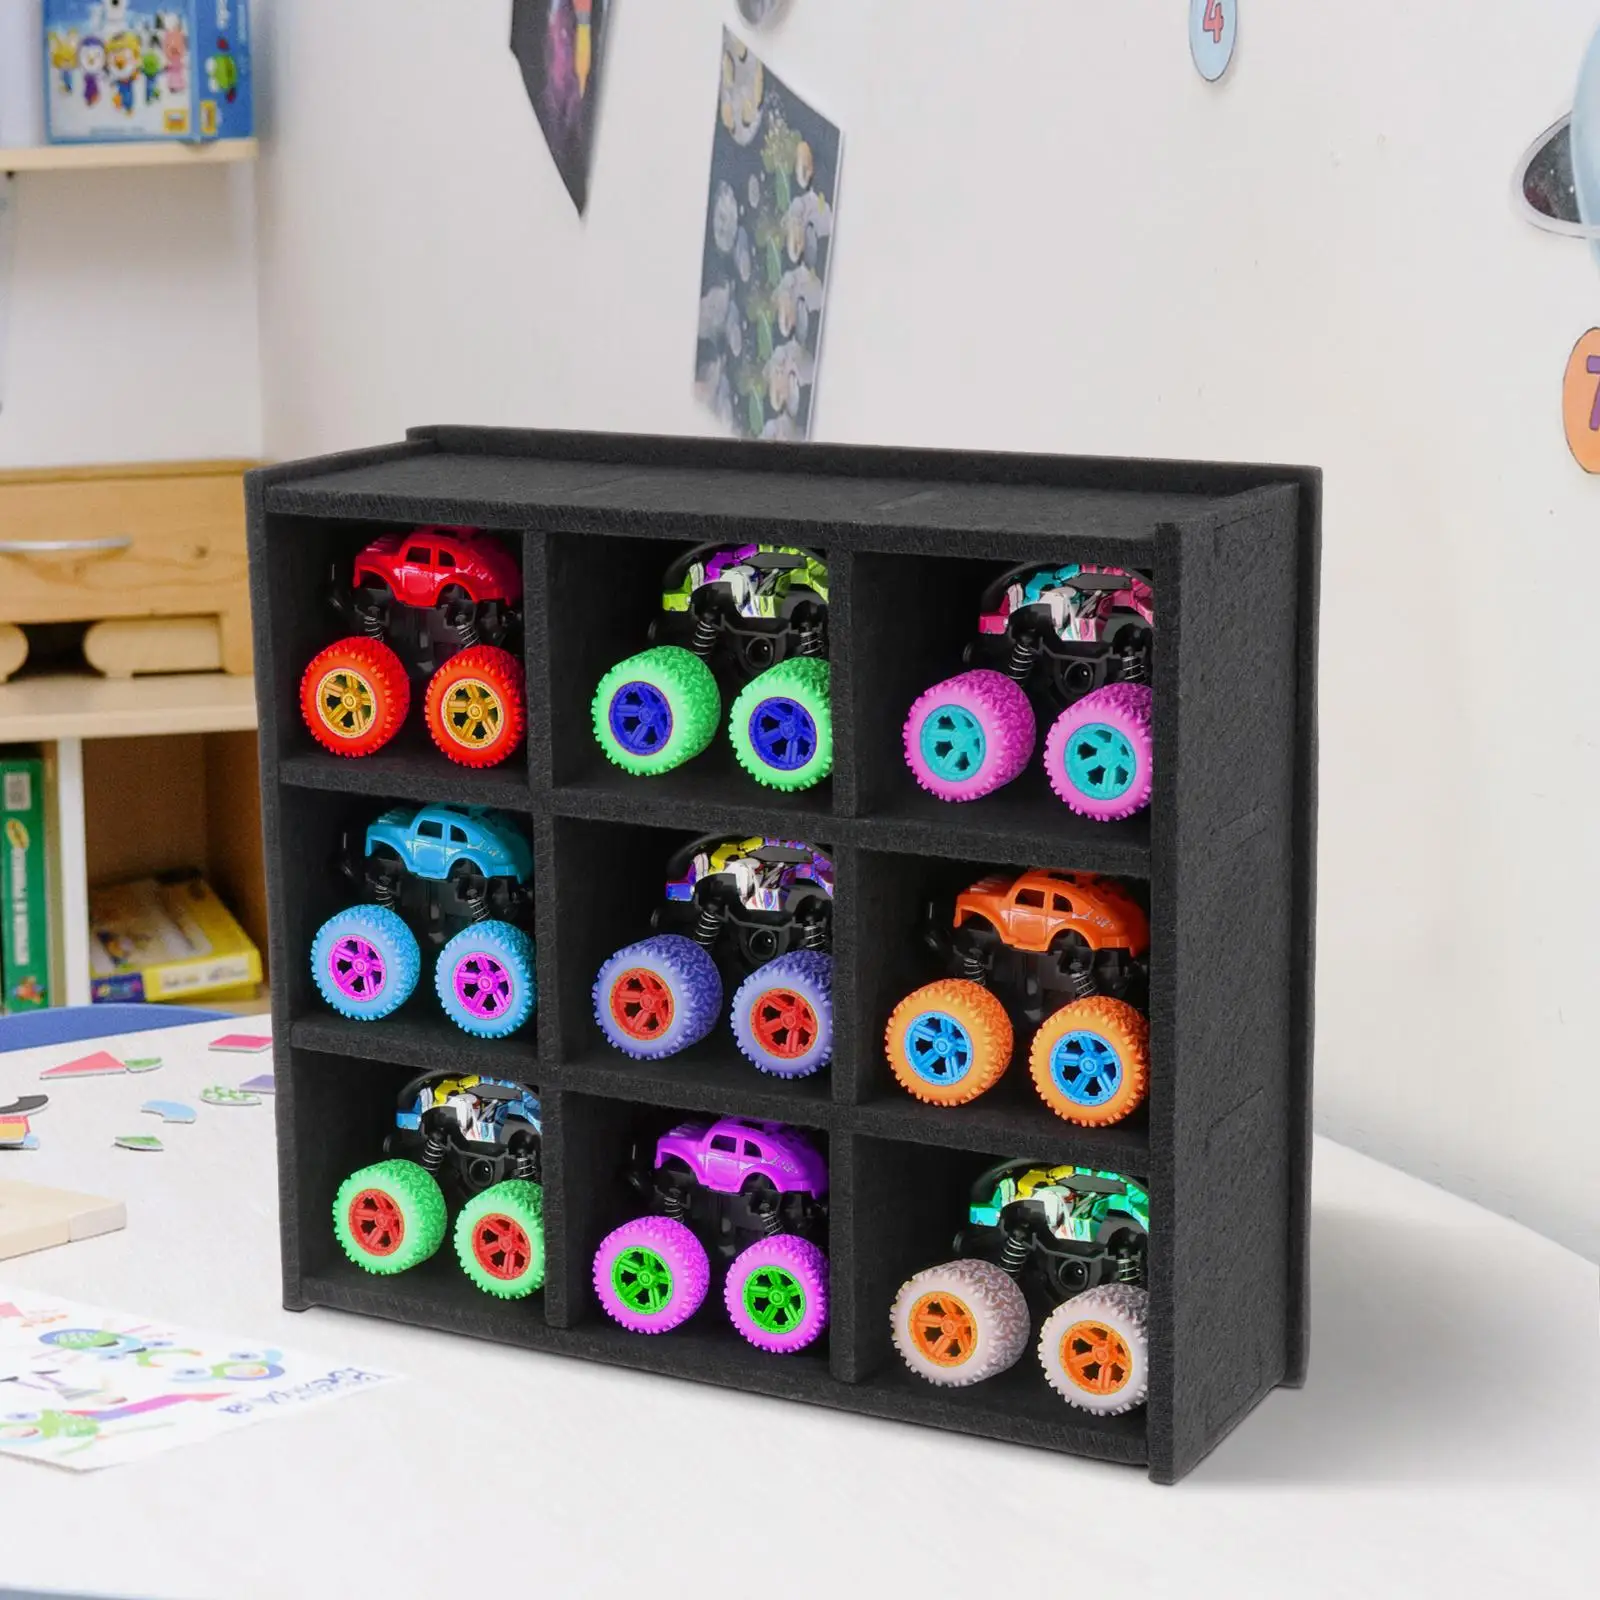 Monster Trucks Toy Wall Mount Display Case with 9 Slots Felt Material Compact DIY Assembled for Displaying Convenient